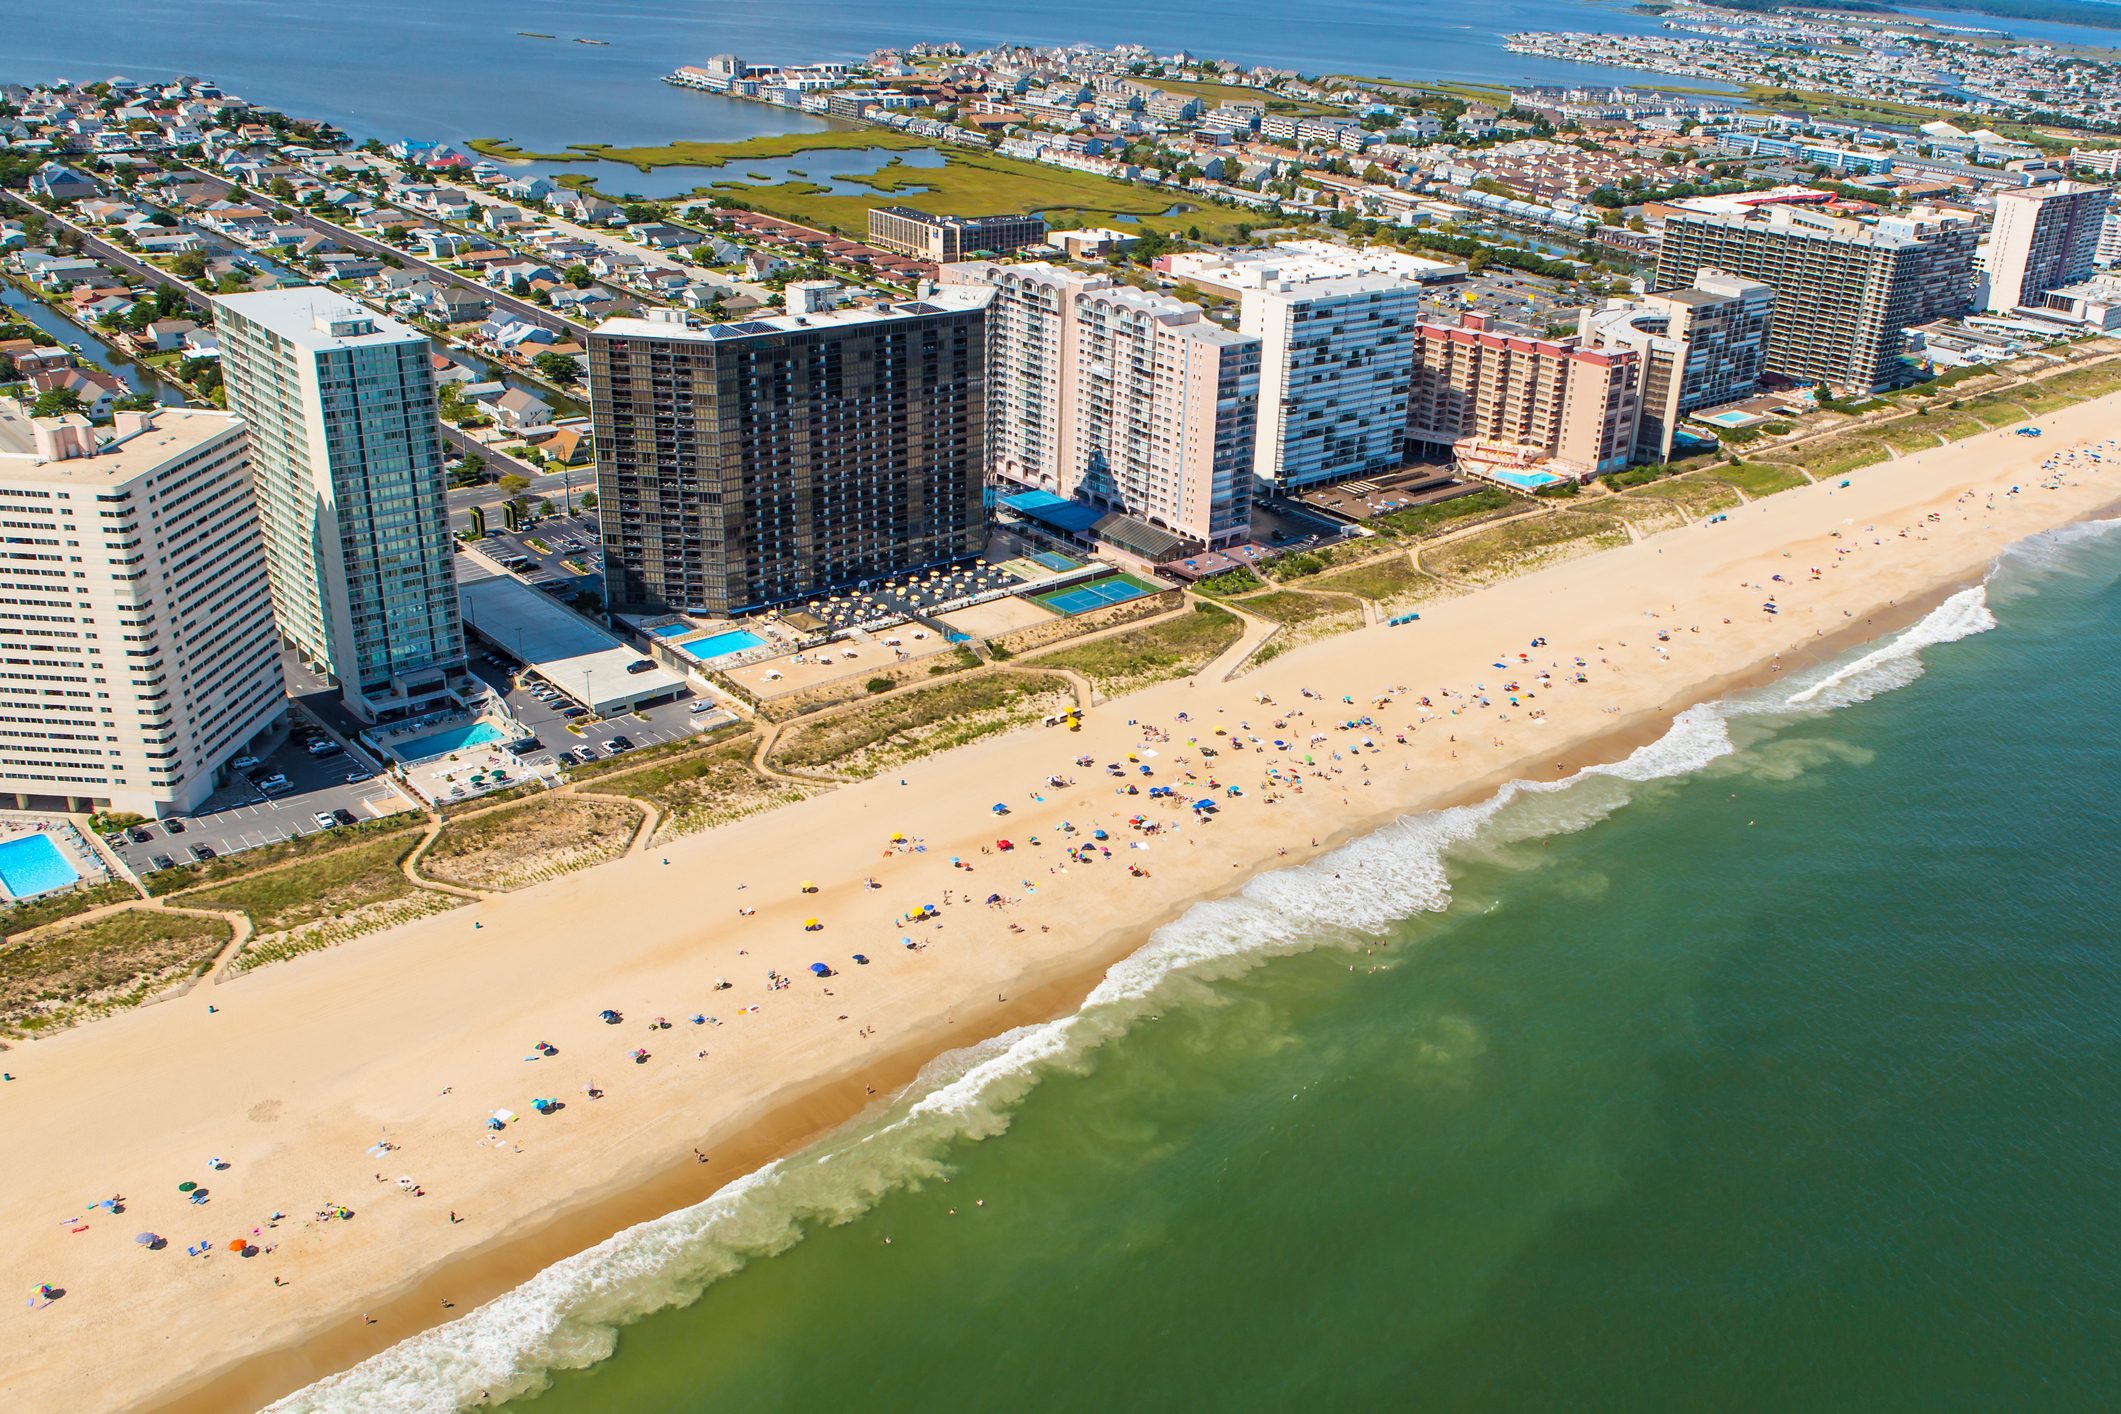 Aerial view of Ocean City, Maryland